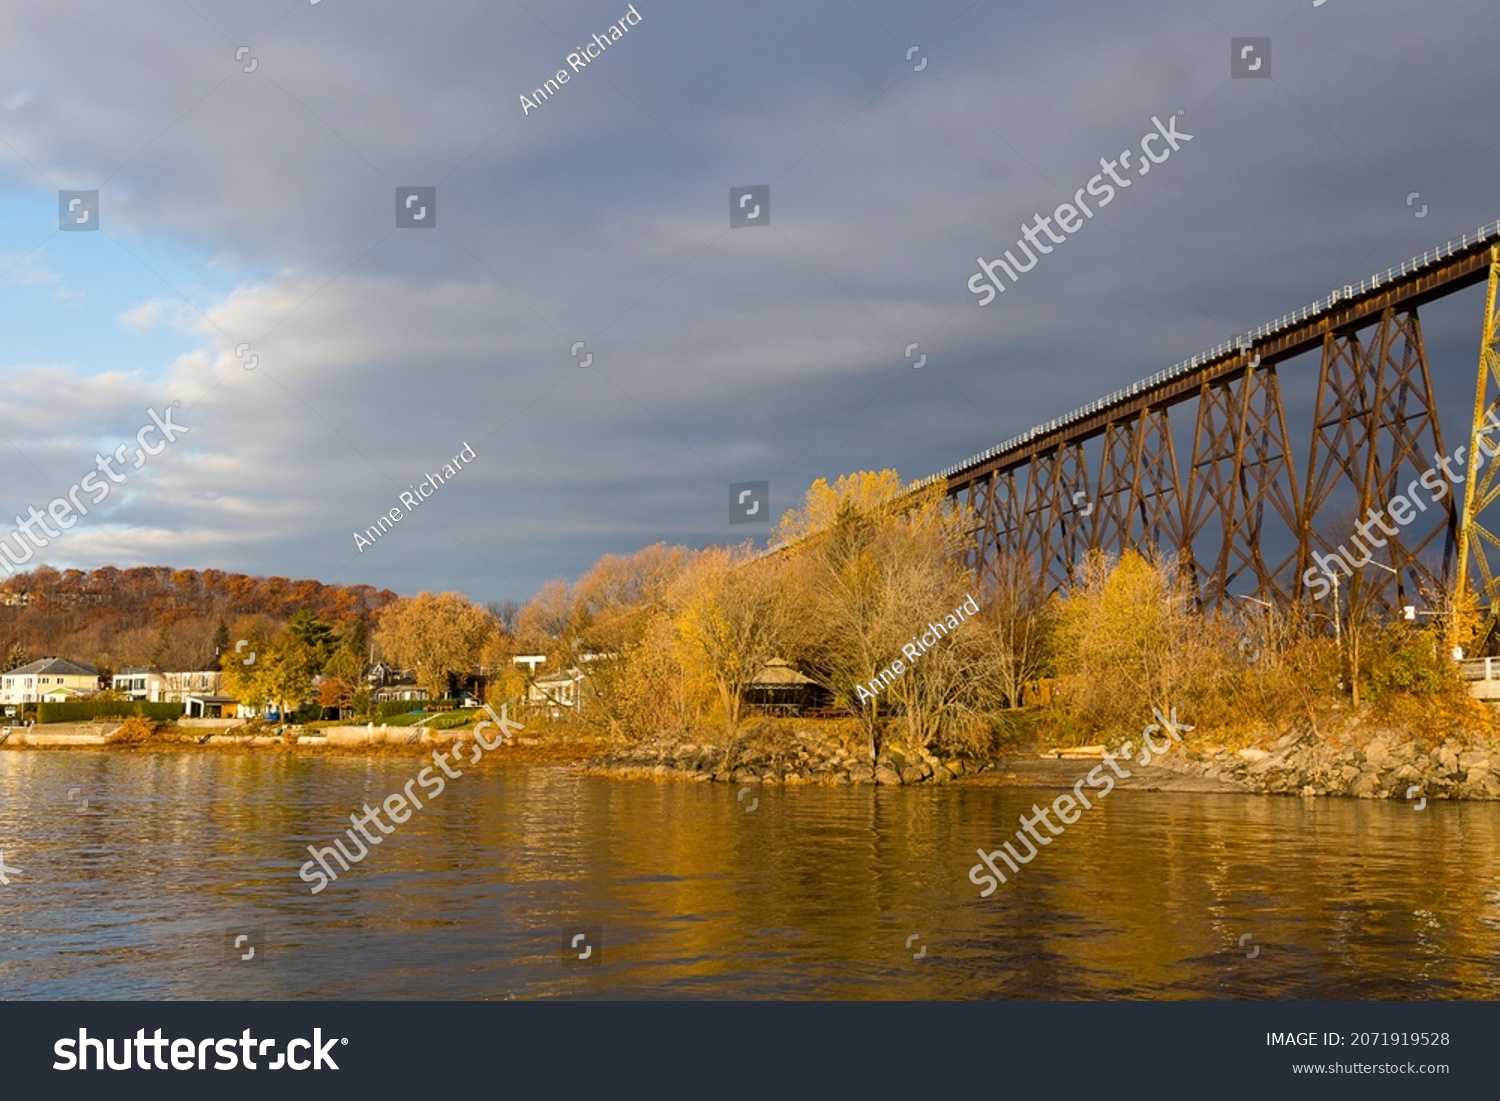 Golden hour landscape view of the Cap-Rouge River flowing into the St. Lawrence River, with a striking railway trestle bridge in the background, Cap-Rouge area, Quebec City, Quebec, Canada #2071919528